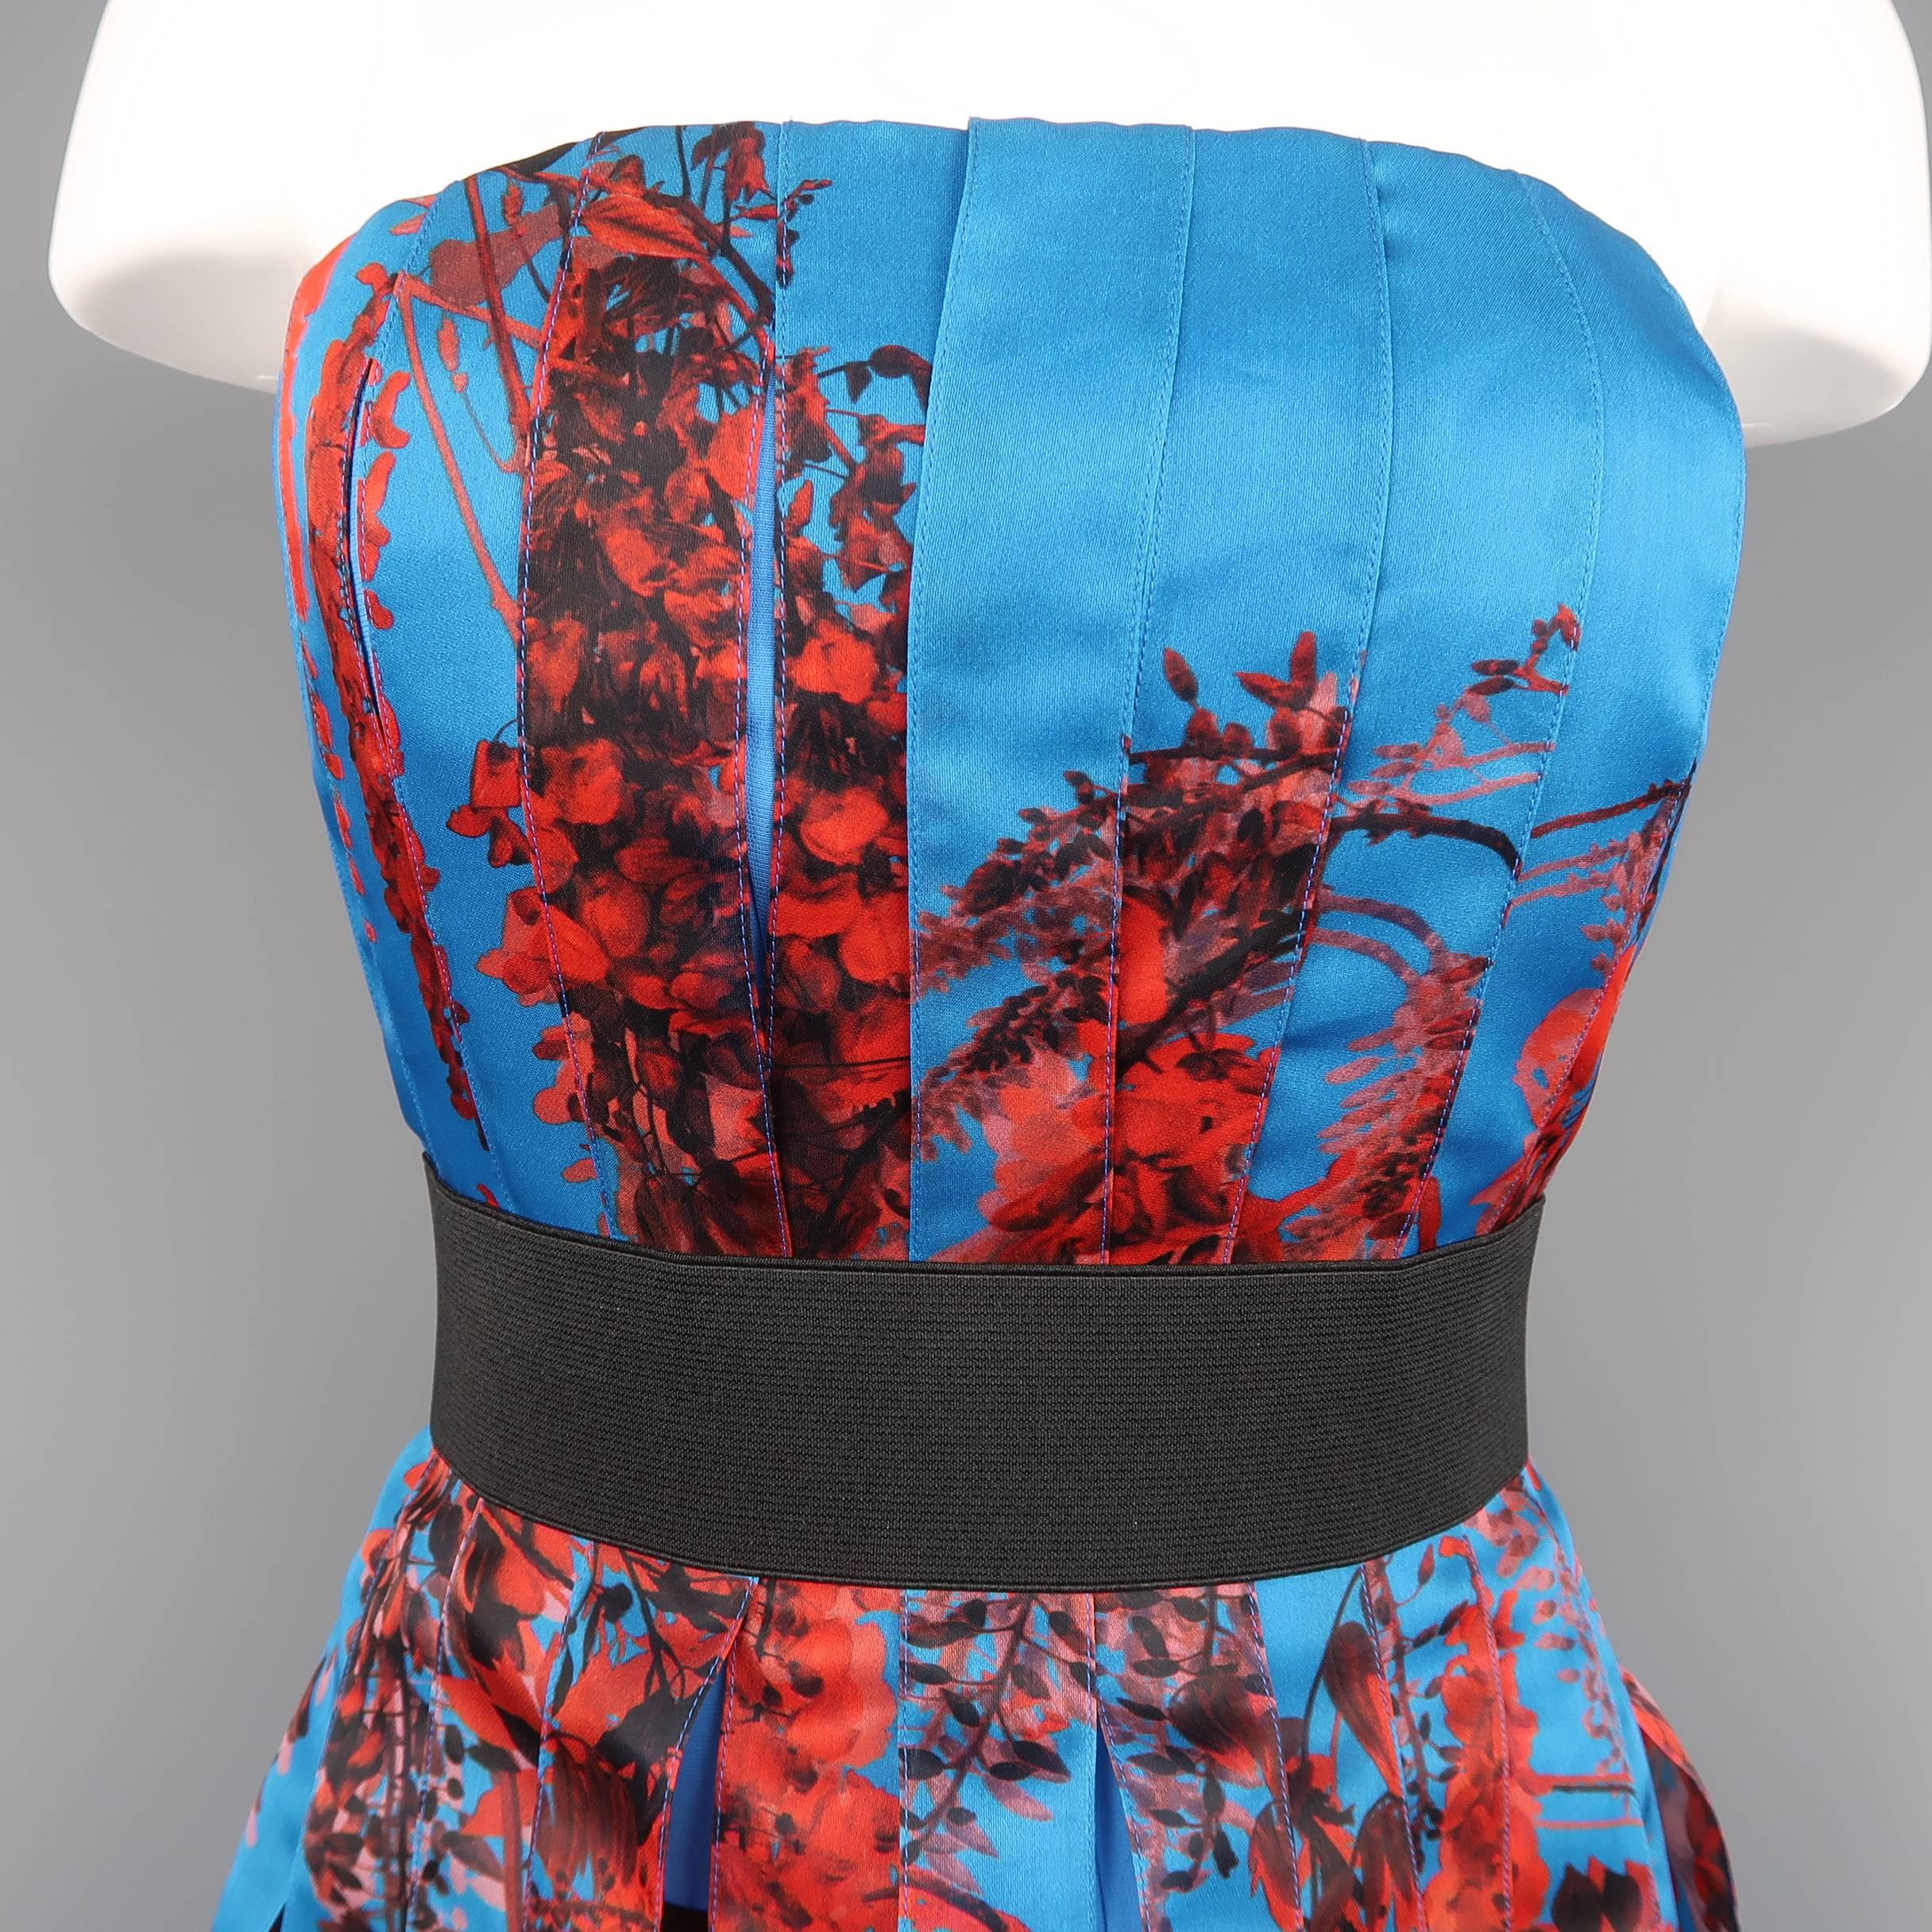 Women's Christian Dior Dress - Spring 2014 Runway - Blue, Red, Floral, Silk, Cocktail